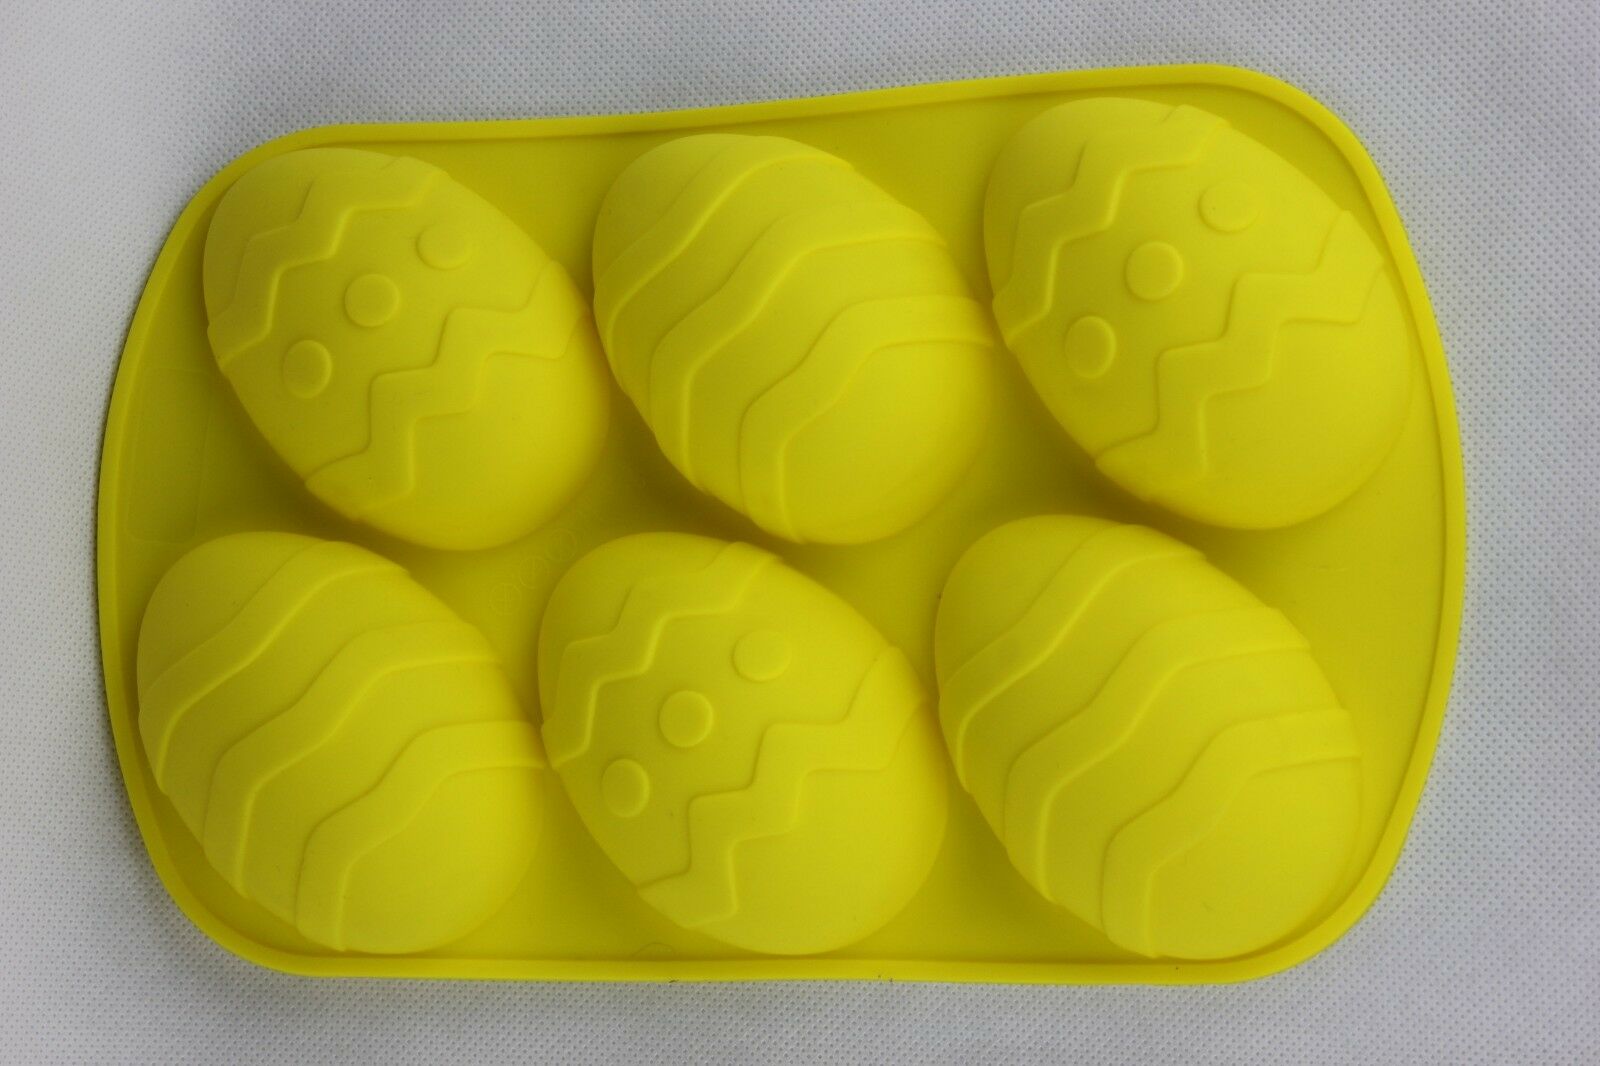 attachment-https://www.cupcakeaddicts.co.uk/wp-content/uploads/imported/2/Silicone-Easter-Egg-Mould-Make-your-own-Chocolate-Fondant-Decorating-Craft-L-323642309562-3.jpg